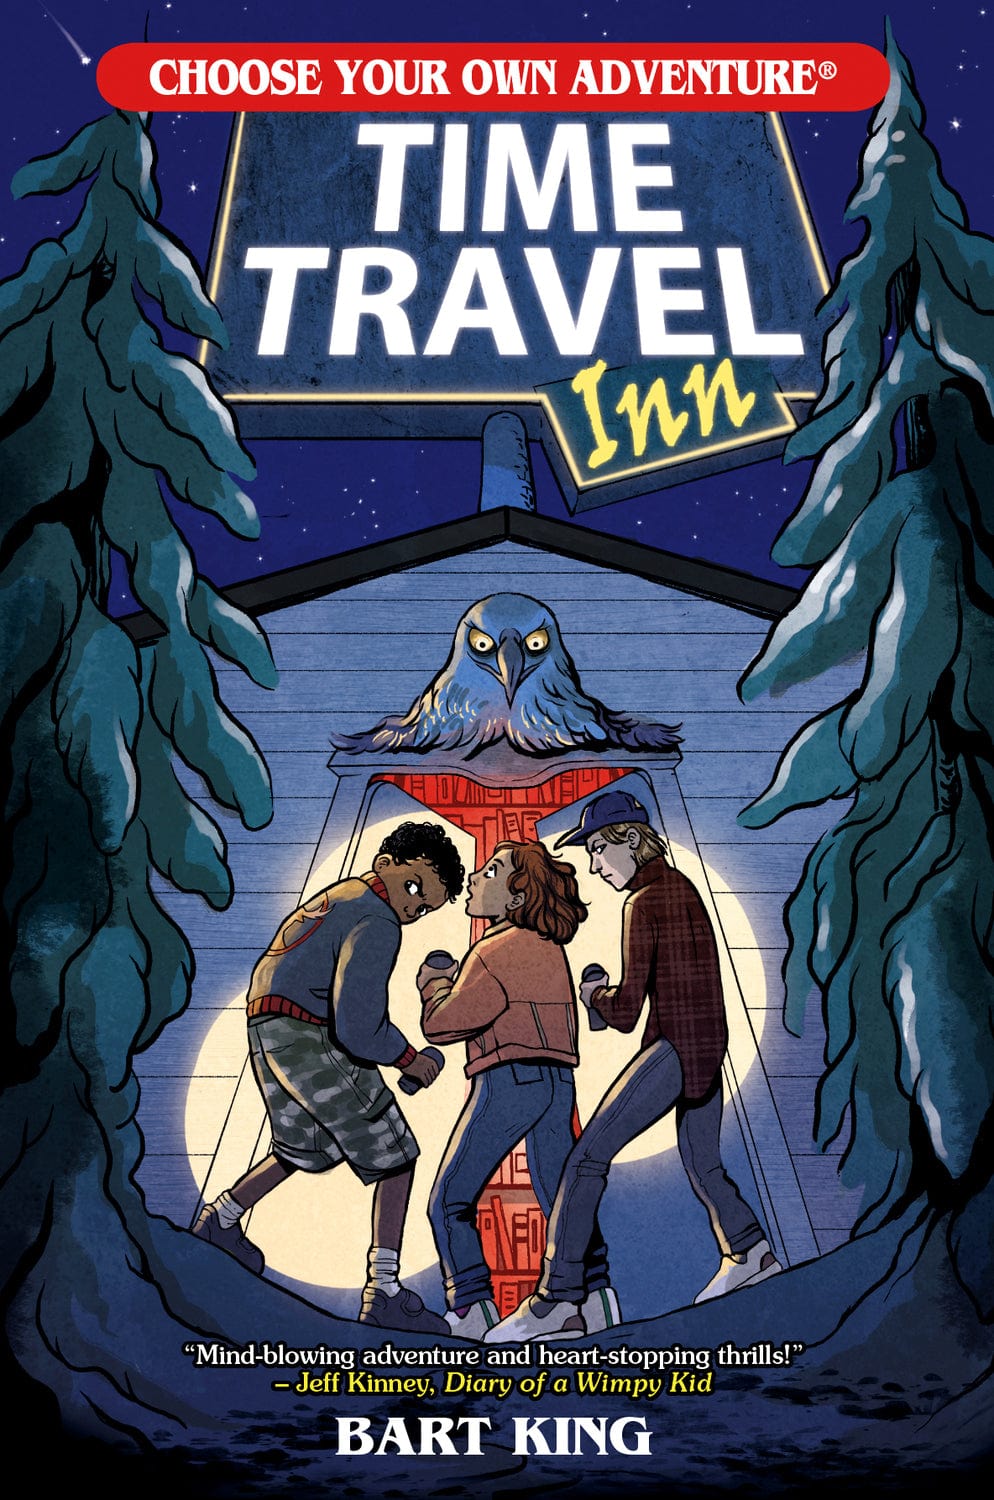 Time Travel Inn (Choose Your Own Adventure) - Saltire Games